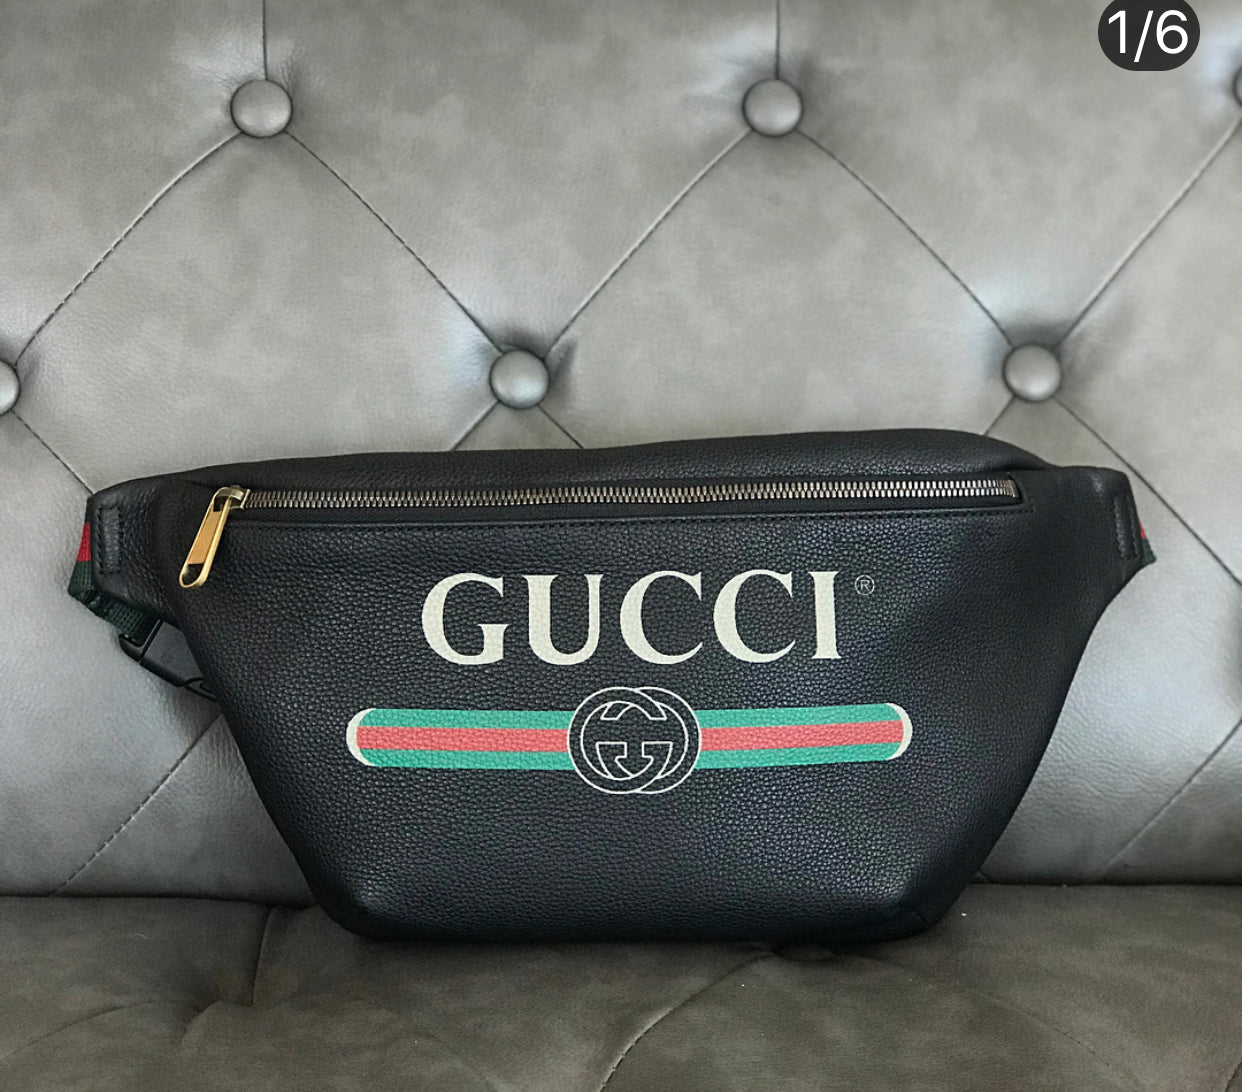 gucci large fanny pack